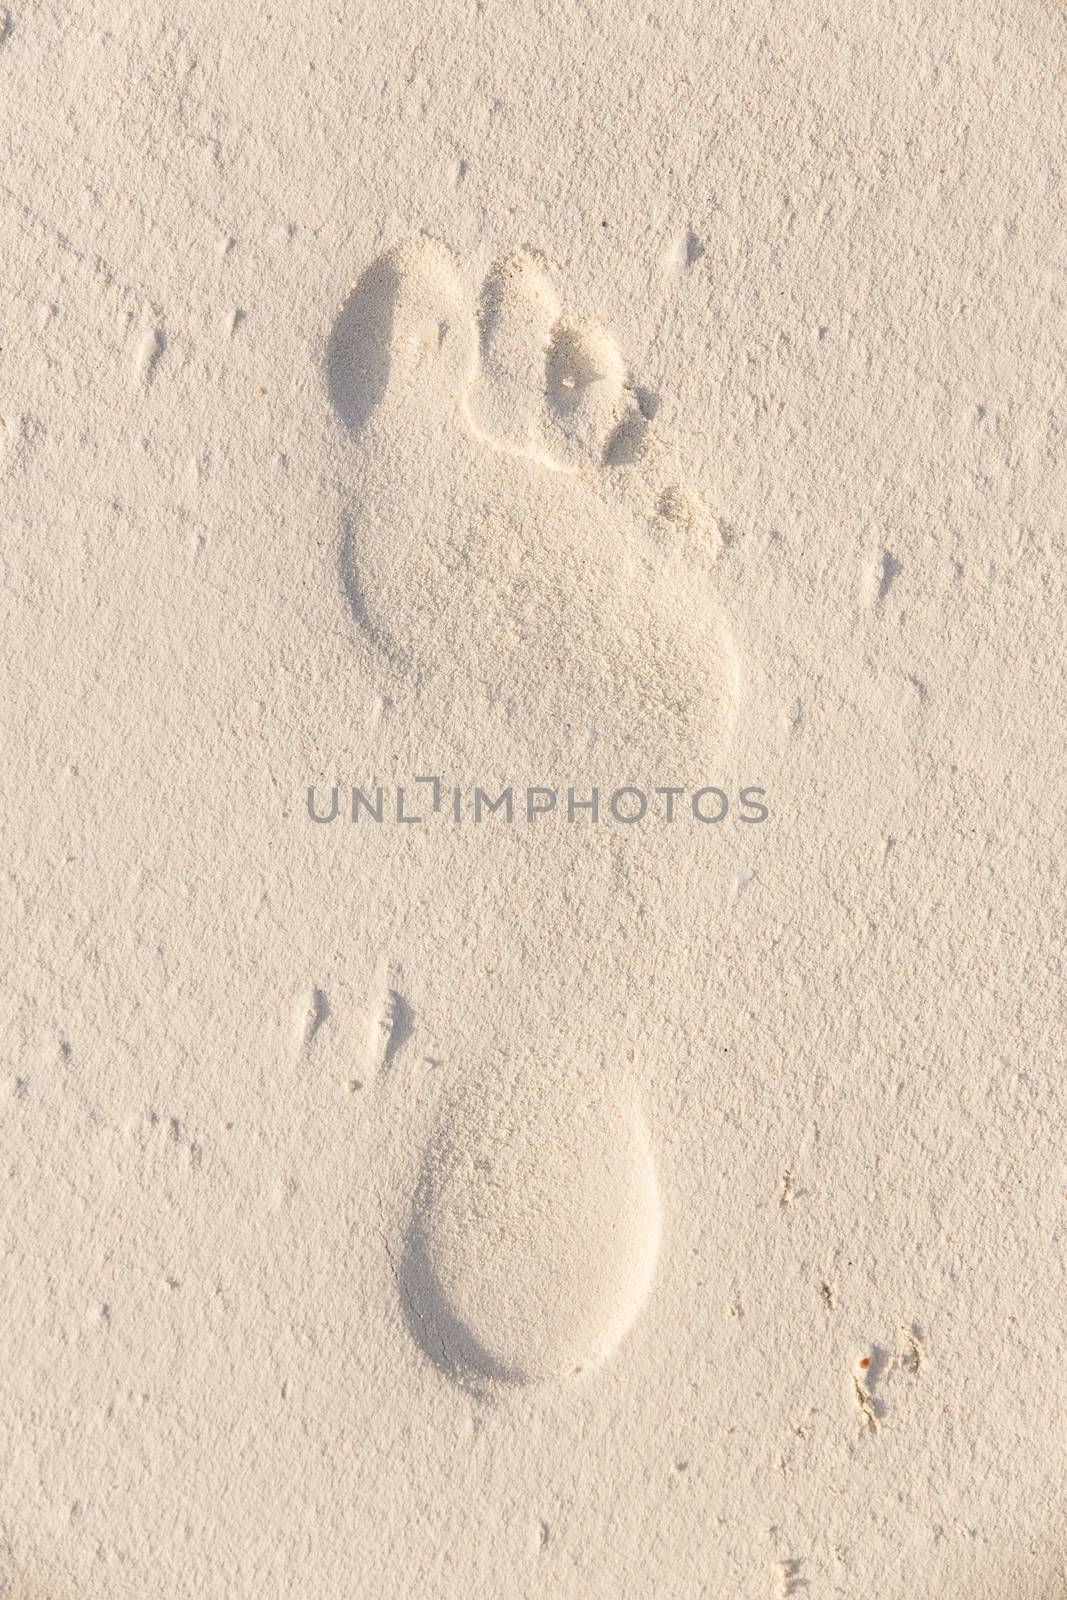 Footprint in the sand. by kasto